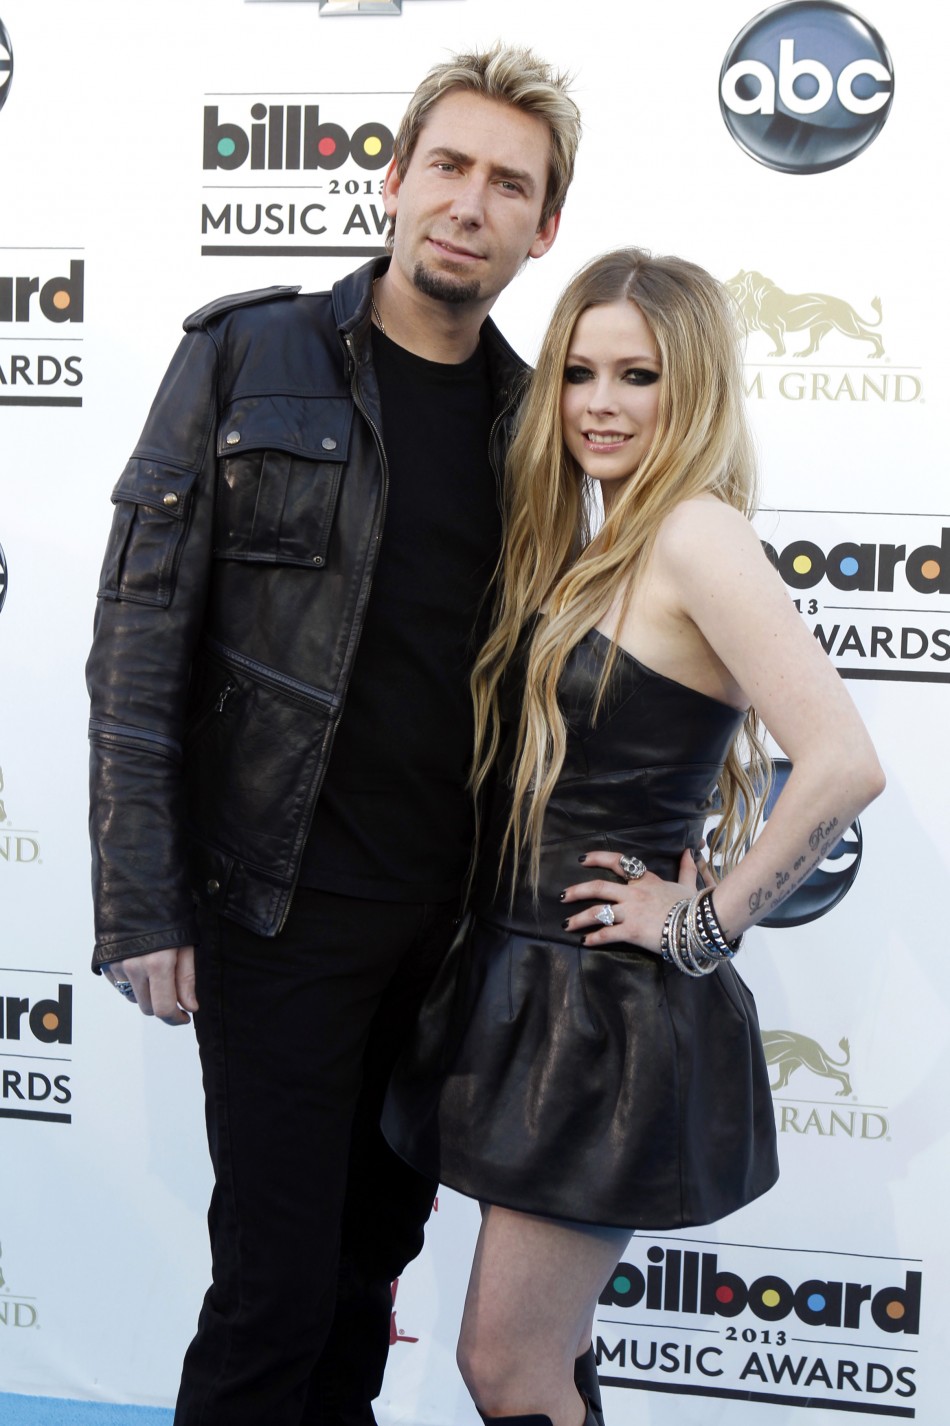 Musicians Chad Krogoer L and Avril Lavigne arrive at the Billboard Music Awards in Las Vegas, Nevada May 19, 2013.